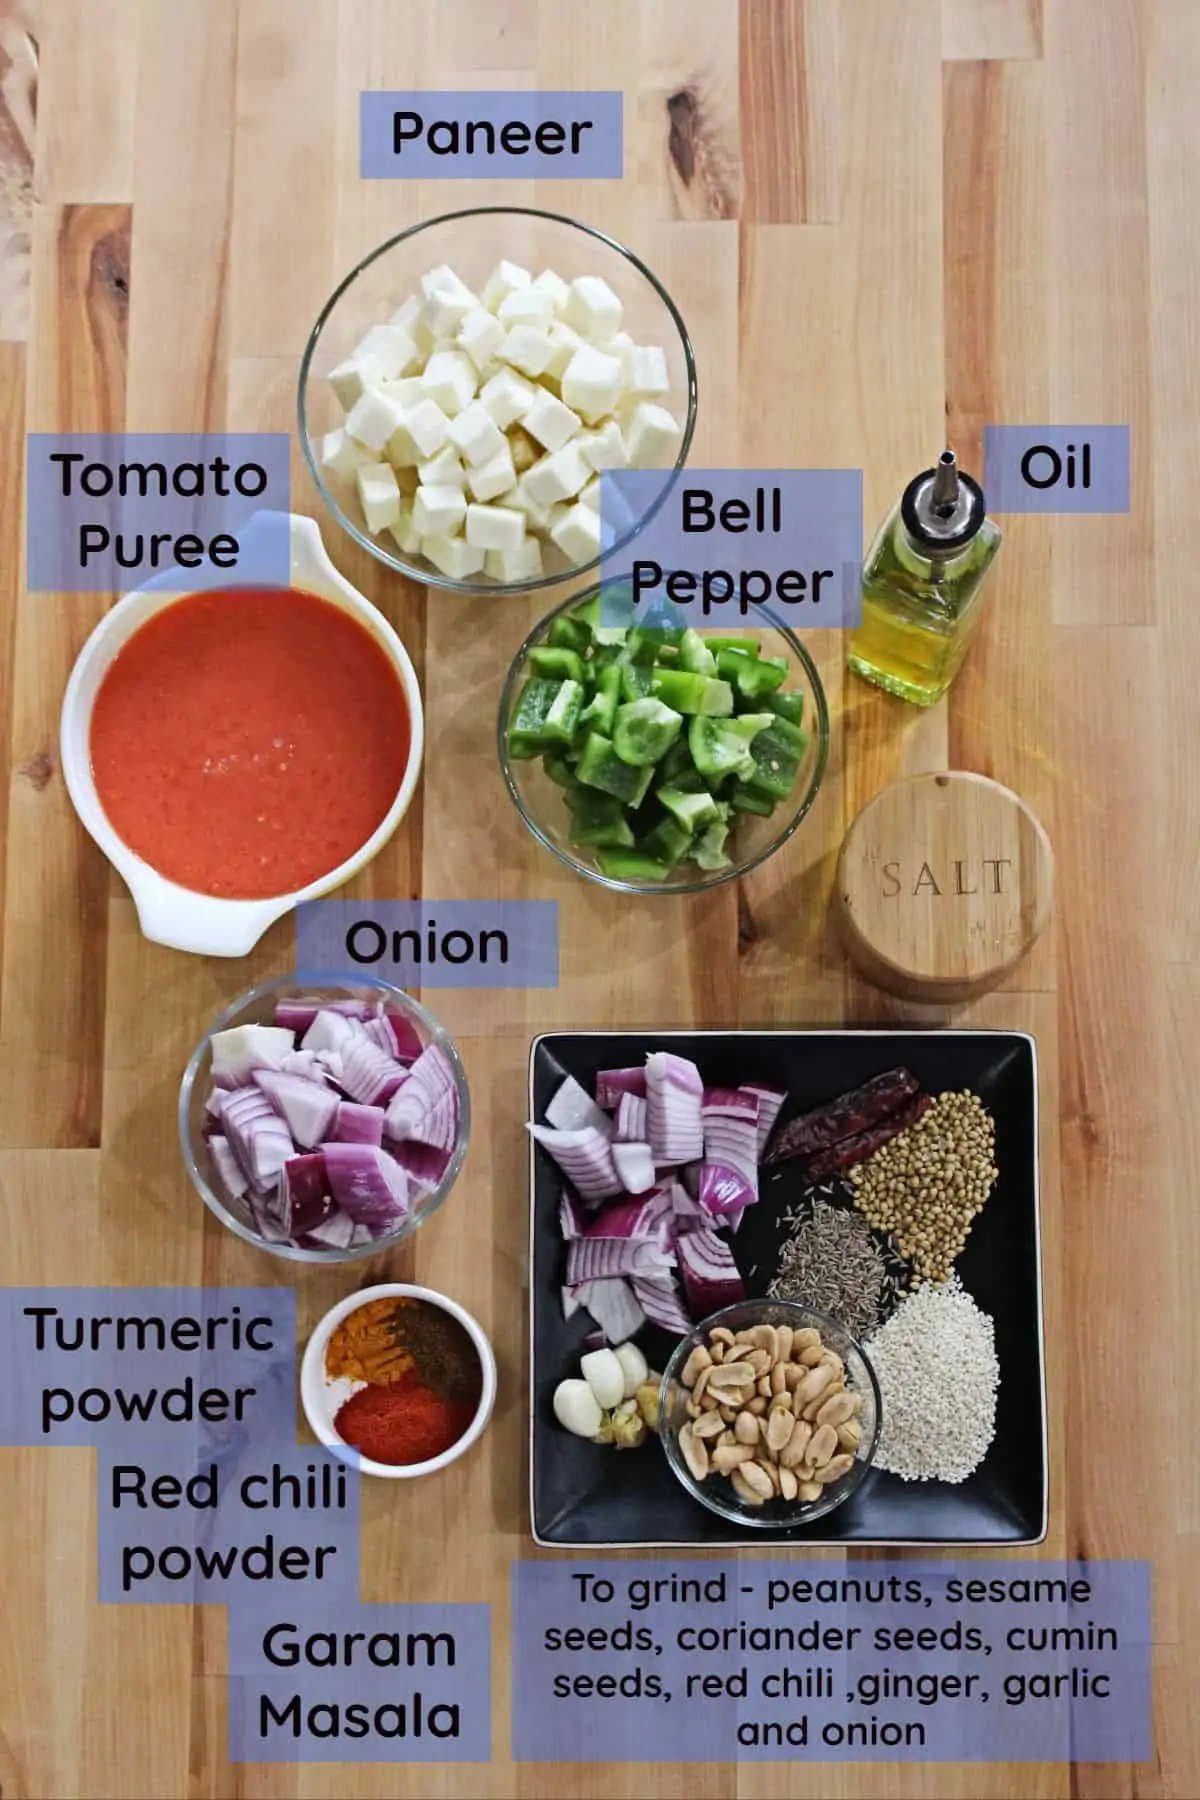 Ingredients labeled and laid out to make Hyderabadi Paneer Subzi